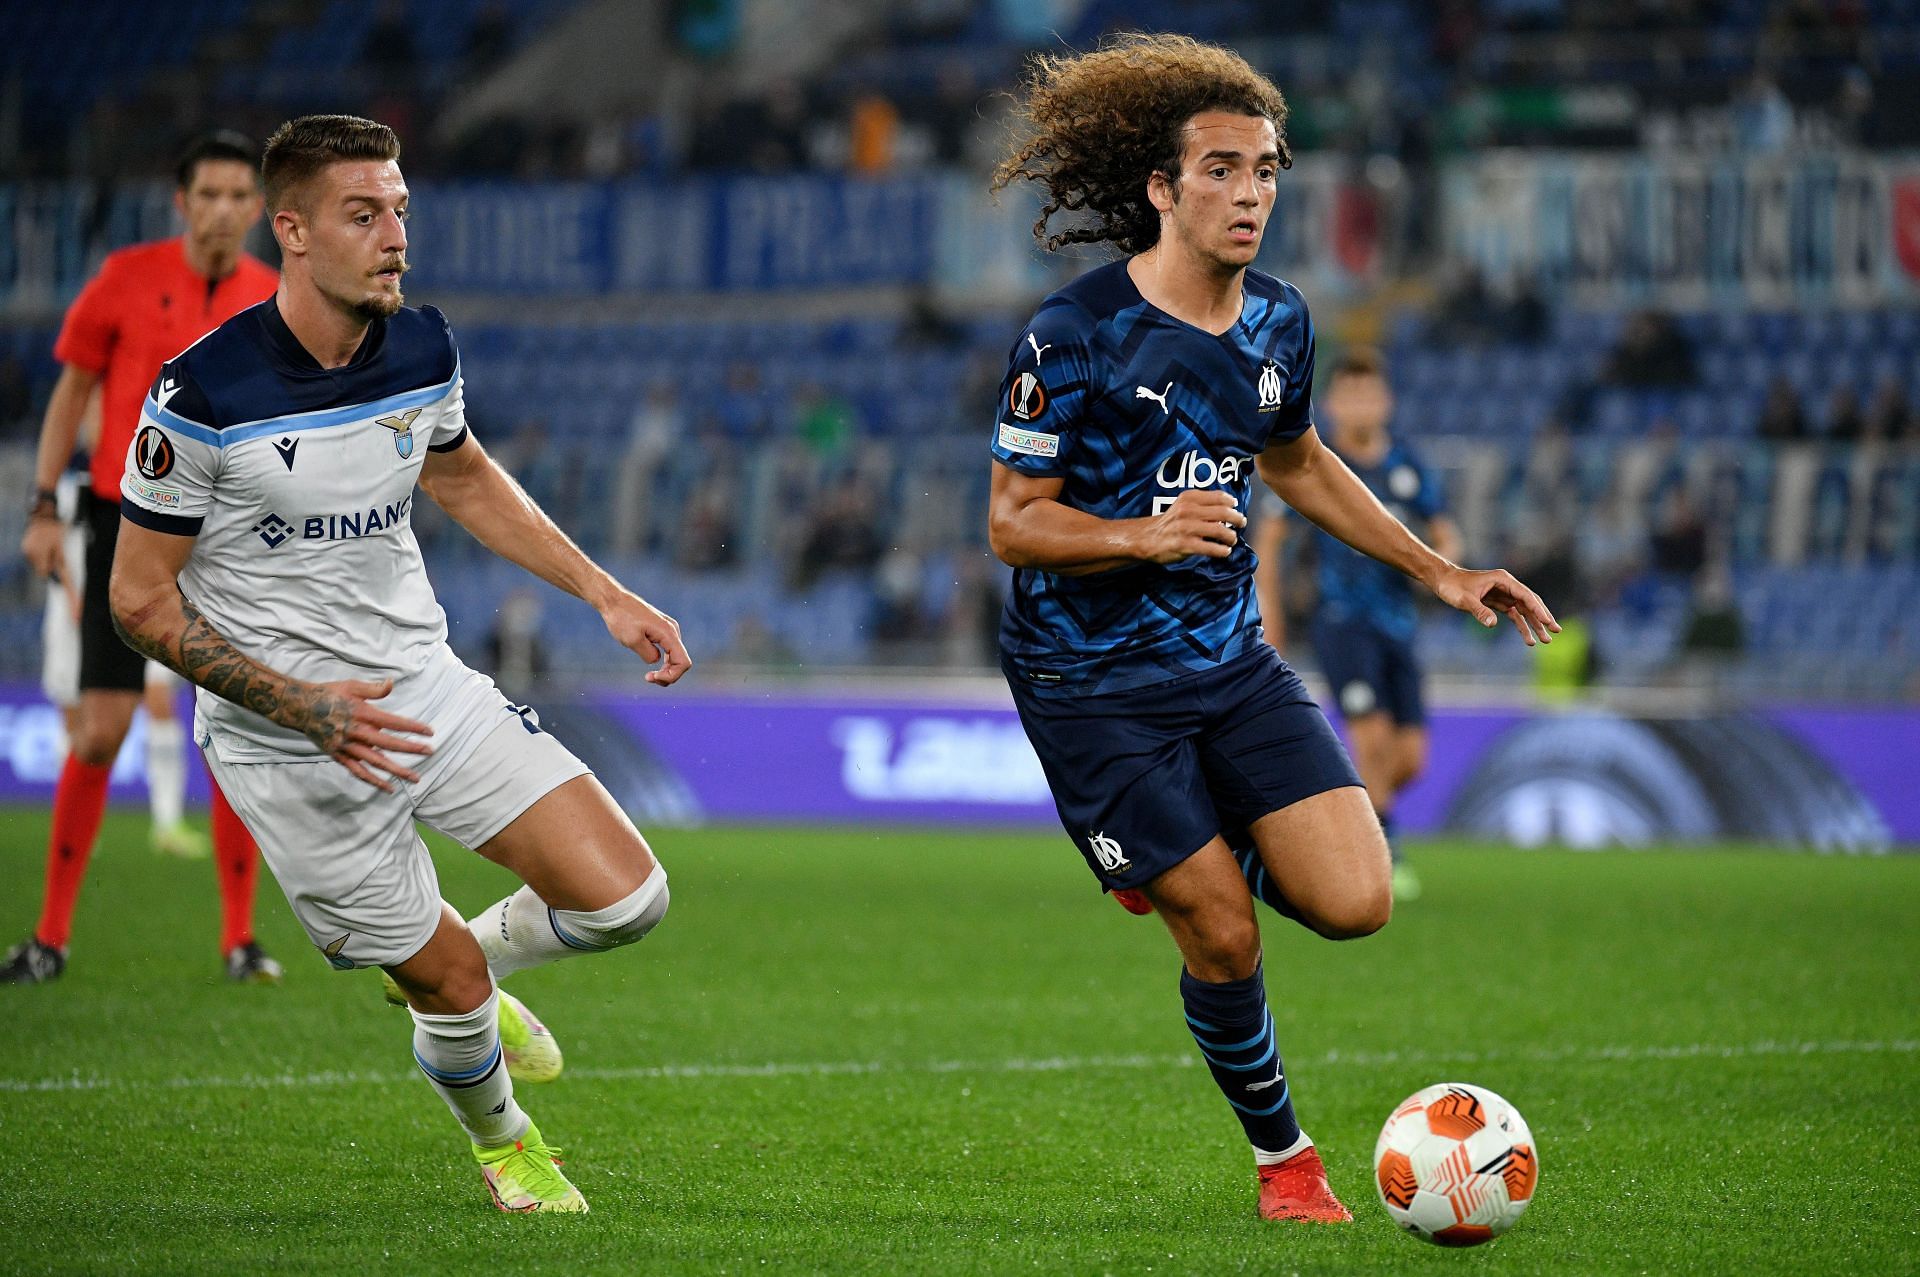 Matteo Guendouzi has revealed that he wants to leave Arsenal at the end of the season.